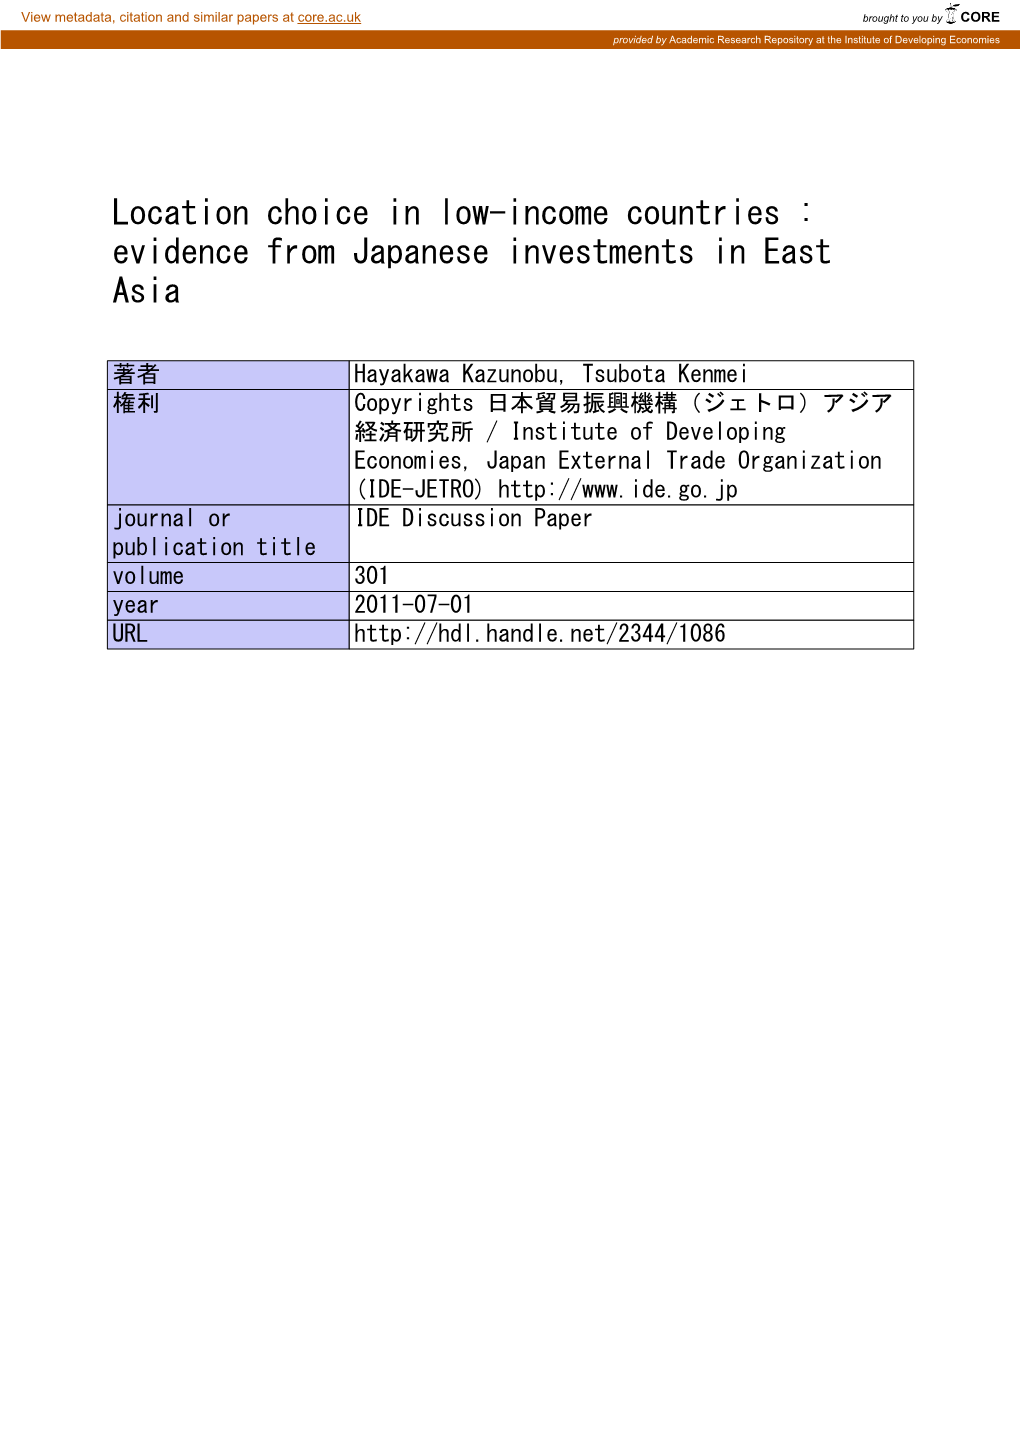 Evidence from Japanese Investments in East Asia